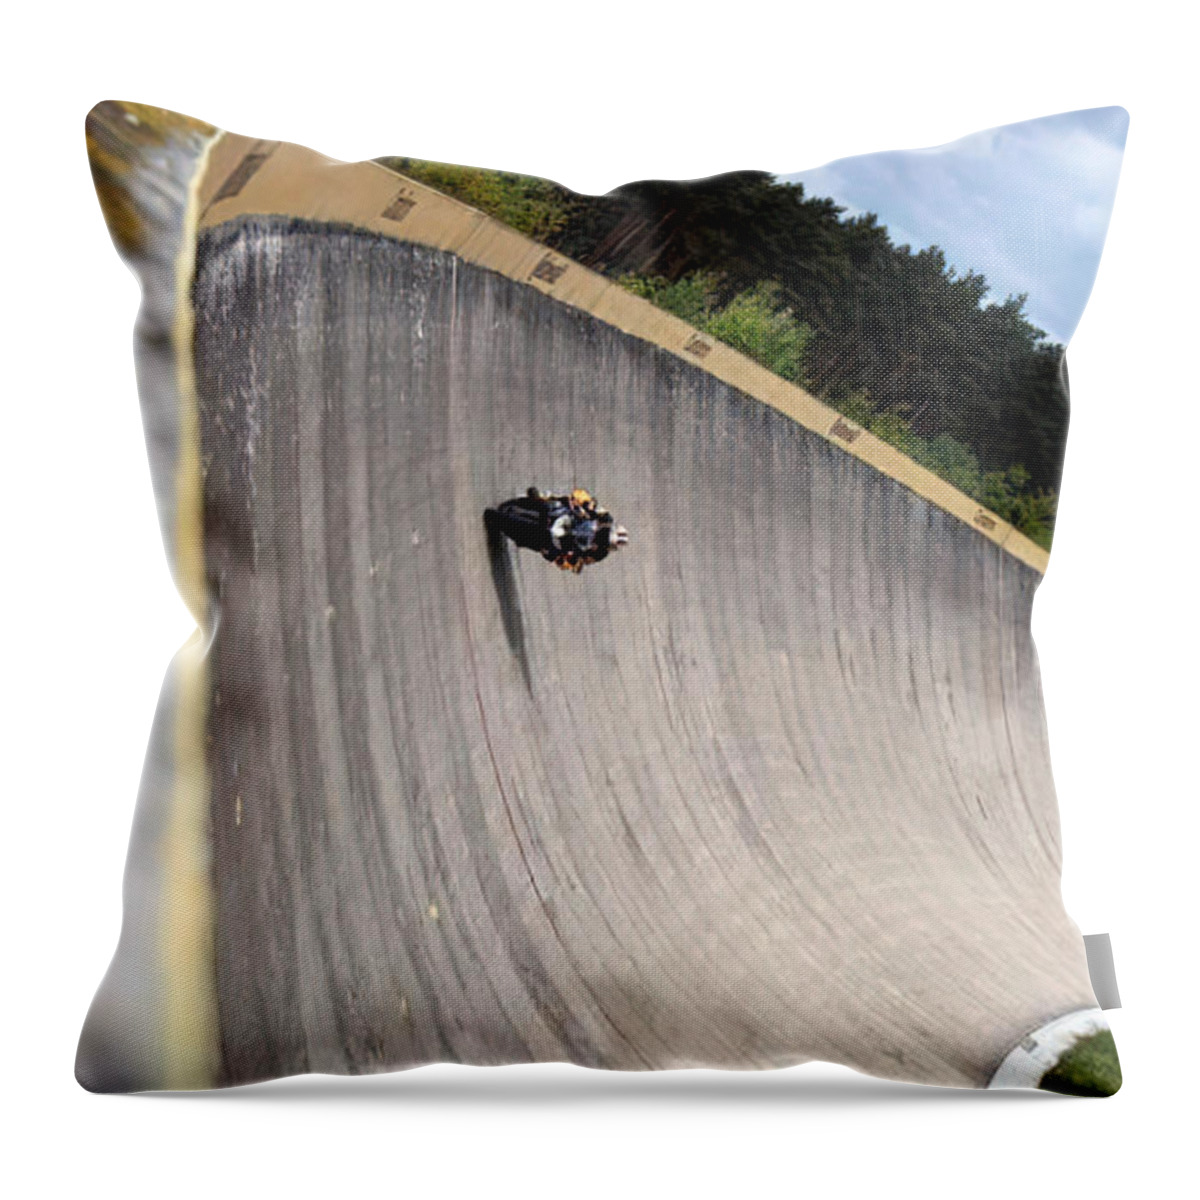 Vintage Throw Pillow featuring the photograph Motorcycle Racing On Steep Banked Race Track by Retrographs